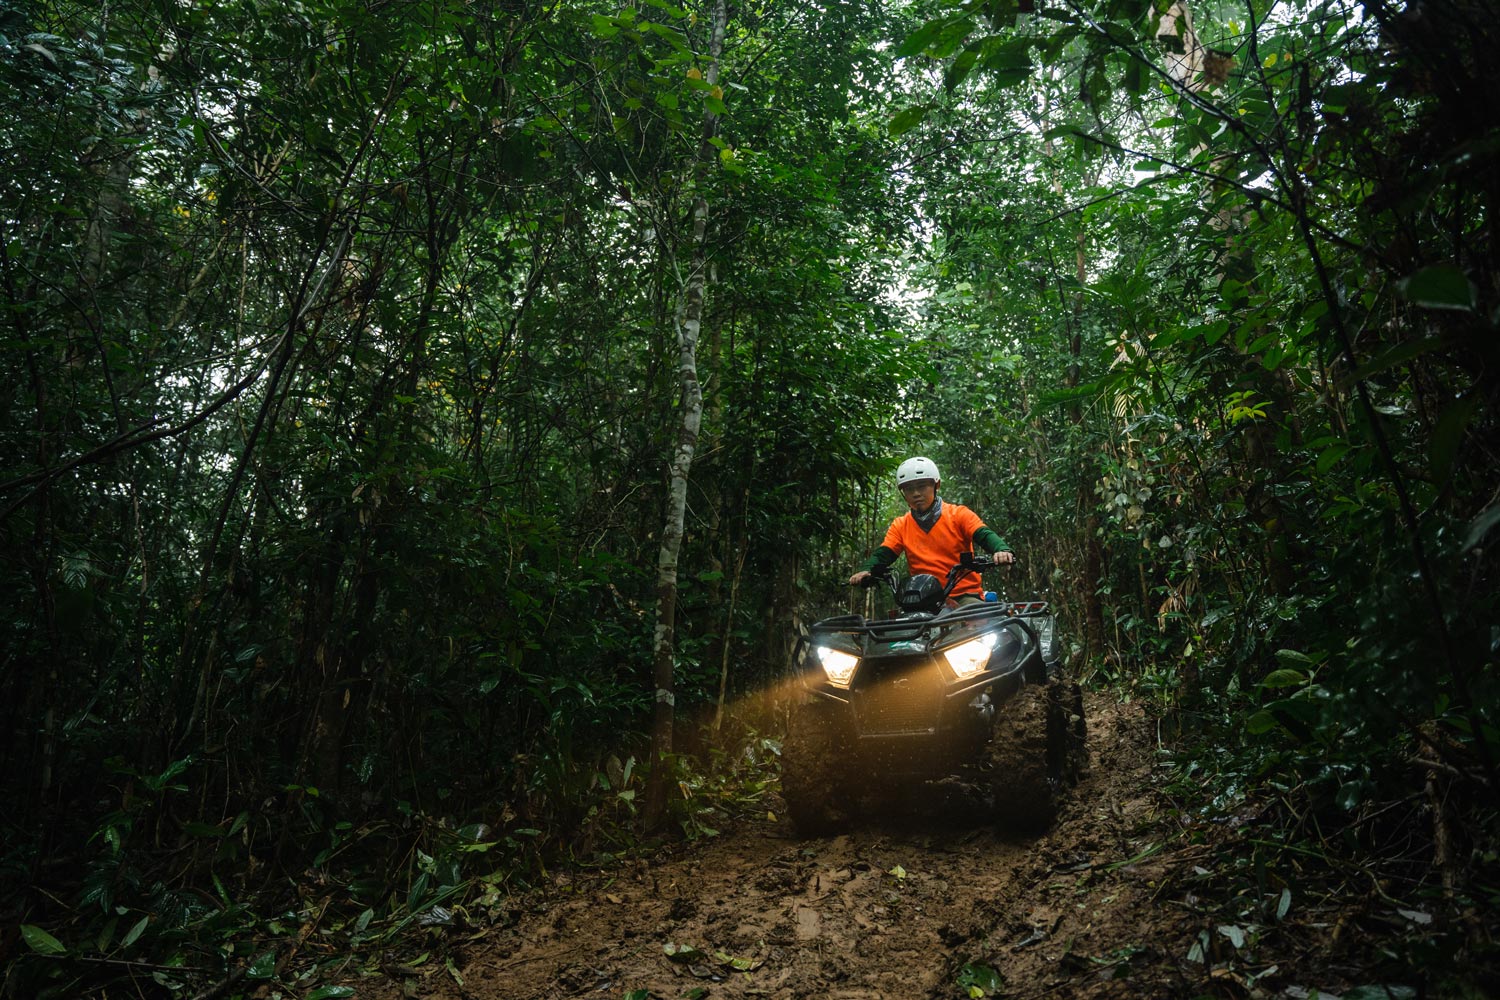 Participating in ATV driving to explore Tan Hoa's Lim forest.